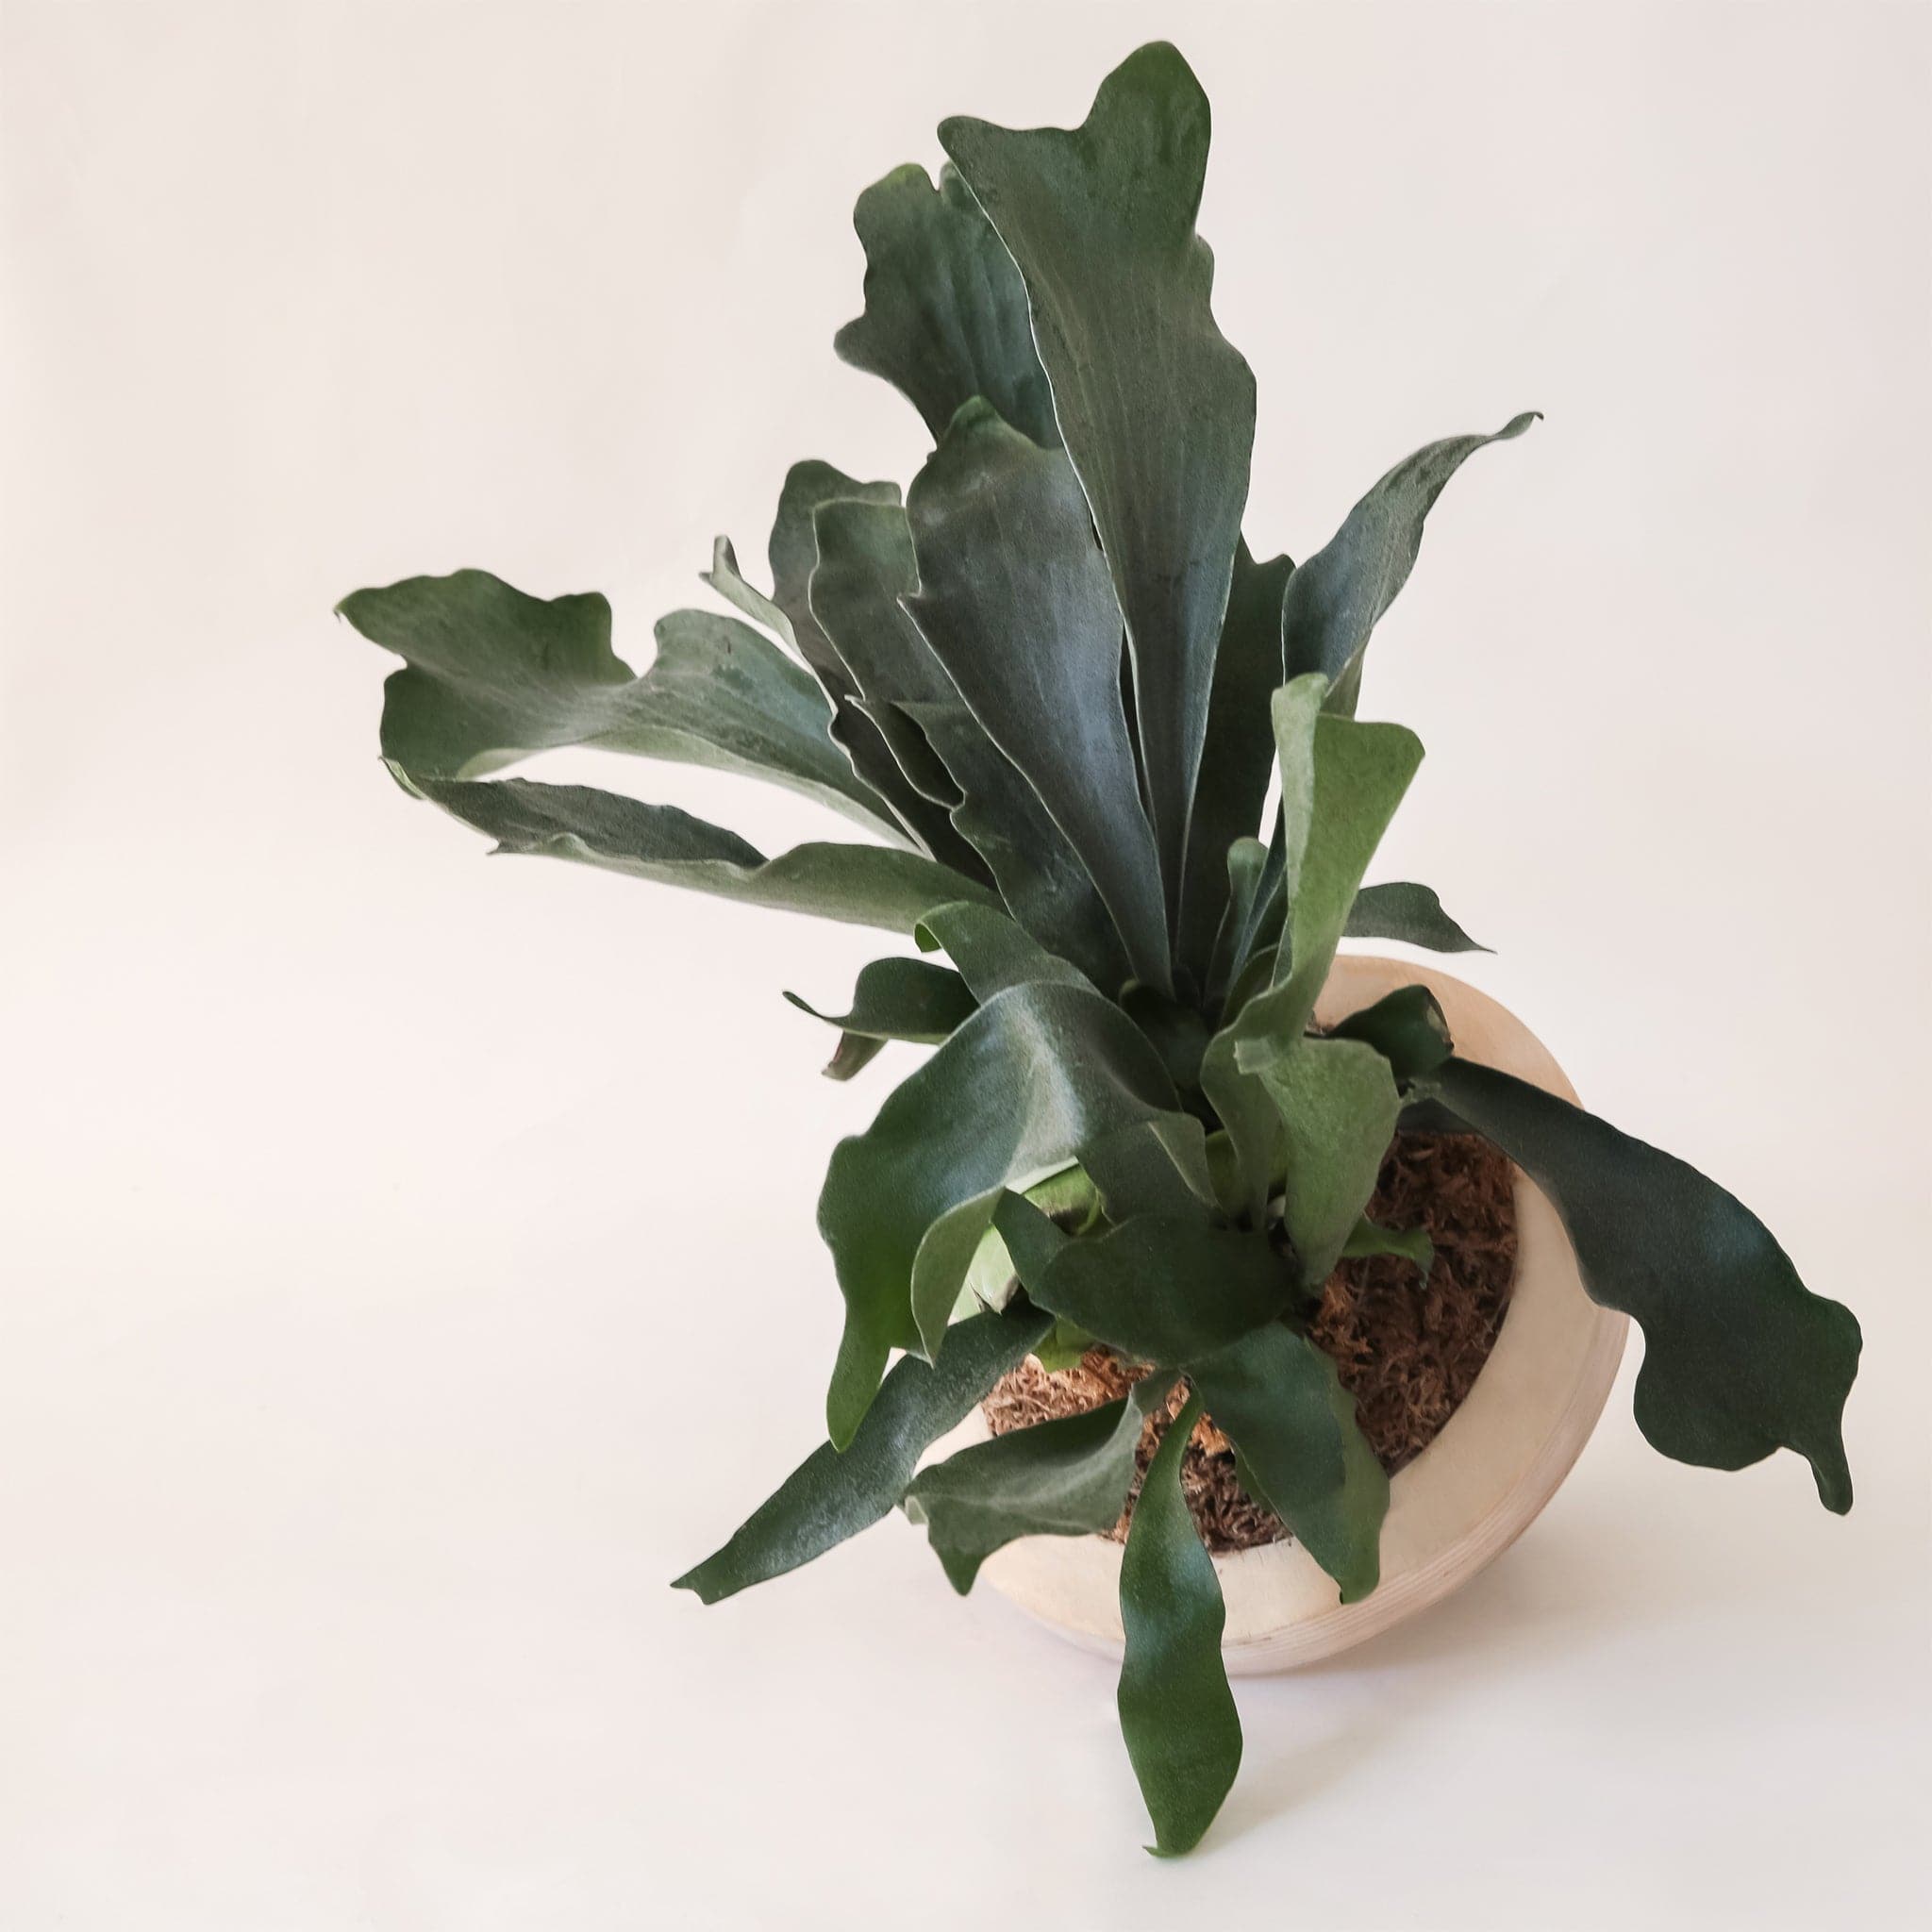 Against a white background is the top view of a mounted staghorn fern. The fern is mounted to a peach colored, round frame. The inside of the frame is brown with long, dark green leaves. The middle leaves are sticking straight up and the side leaves drape down. 